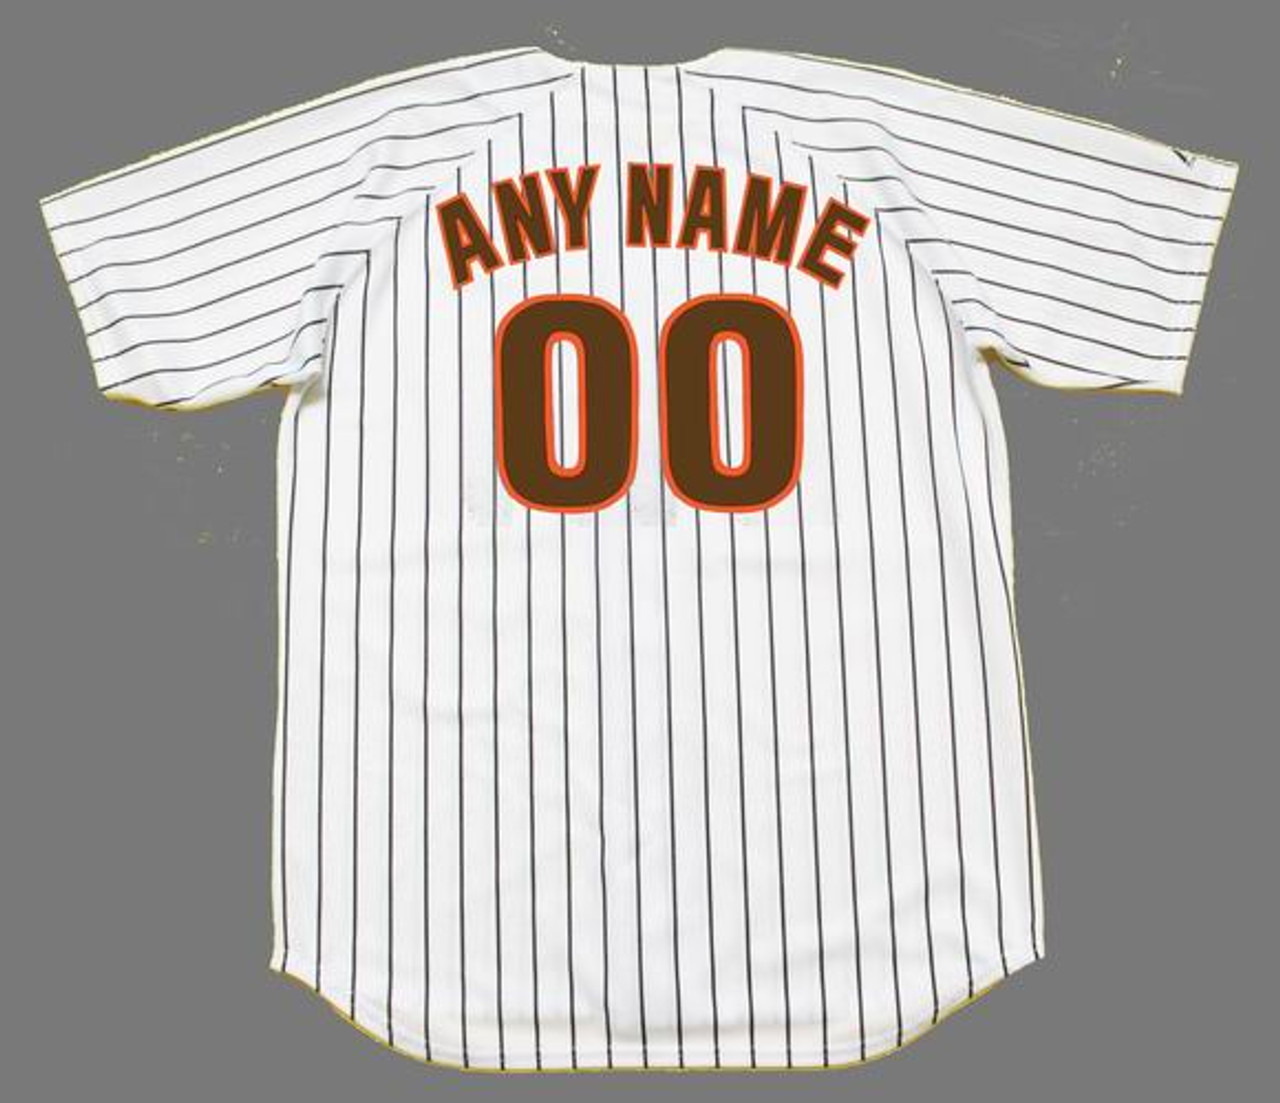 SAN DIEGO PADRES 1980's Majestic Throwback Home Jersey Customized Any Name  & Number(s) - Custom Throwback Jerseys